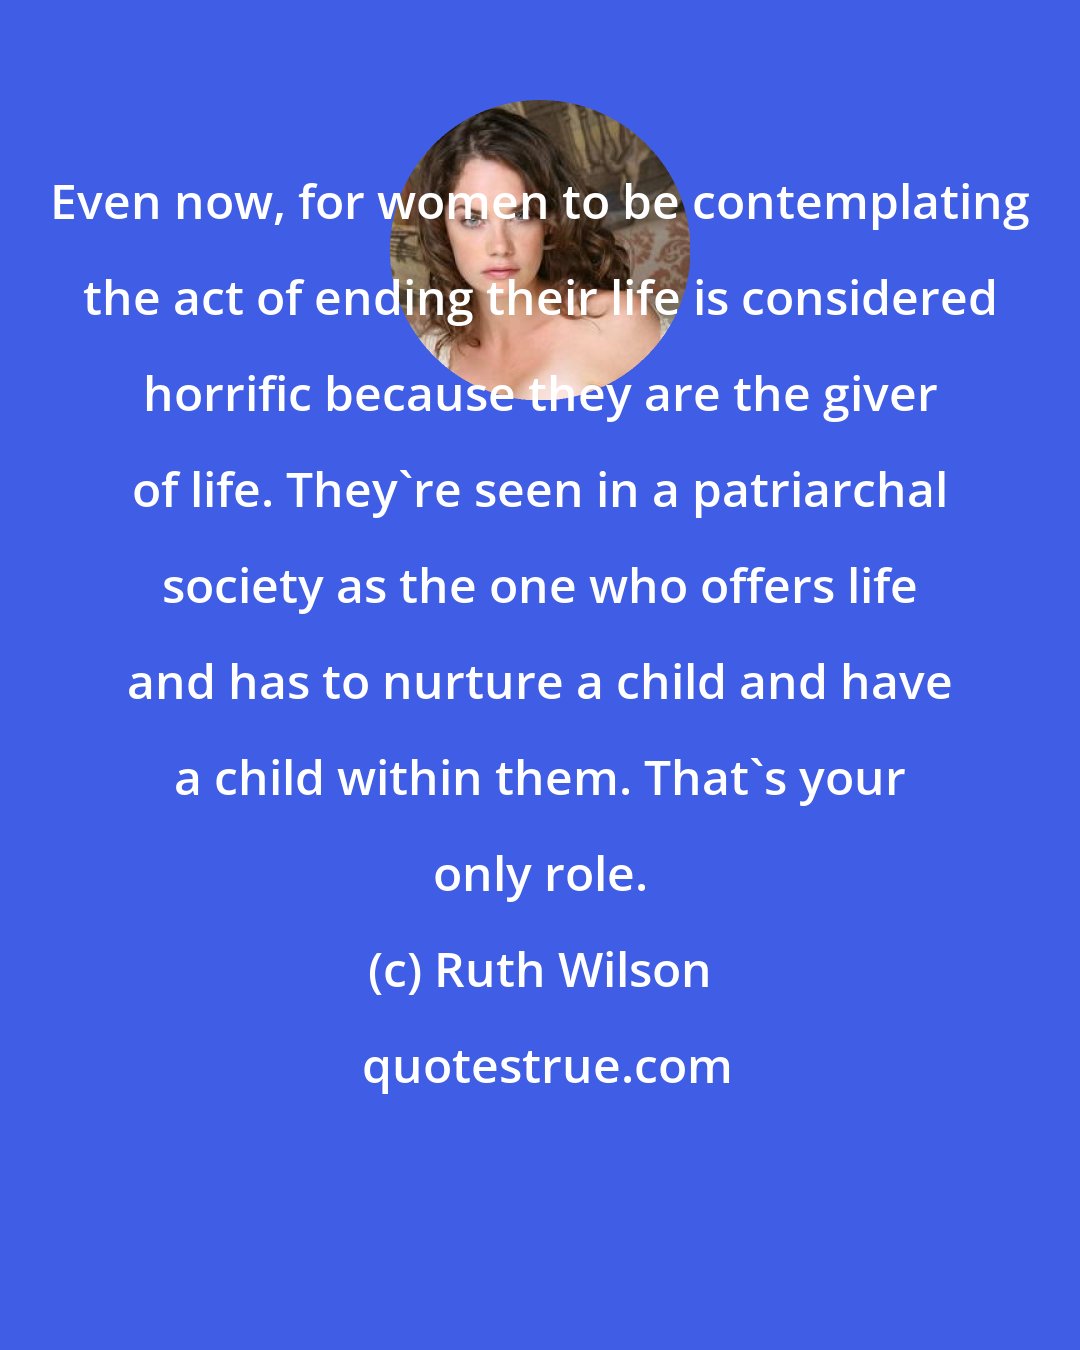 Ruth Wilson: Even now, for women to be contemplating the act of ending their life is considered horrific because they are the giver of life. They're seen in a patriarchal society as the one who offers life and has to nurture a child and have a child within them. That's your only role.